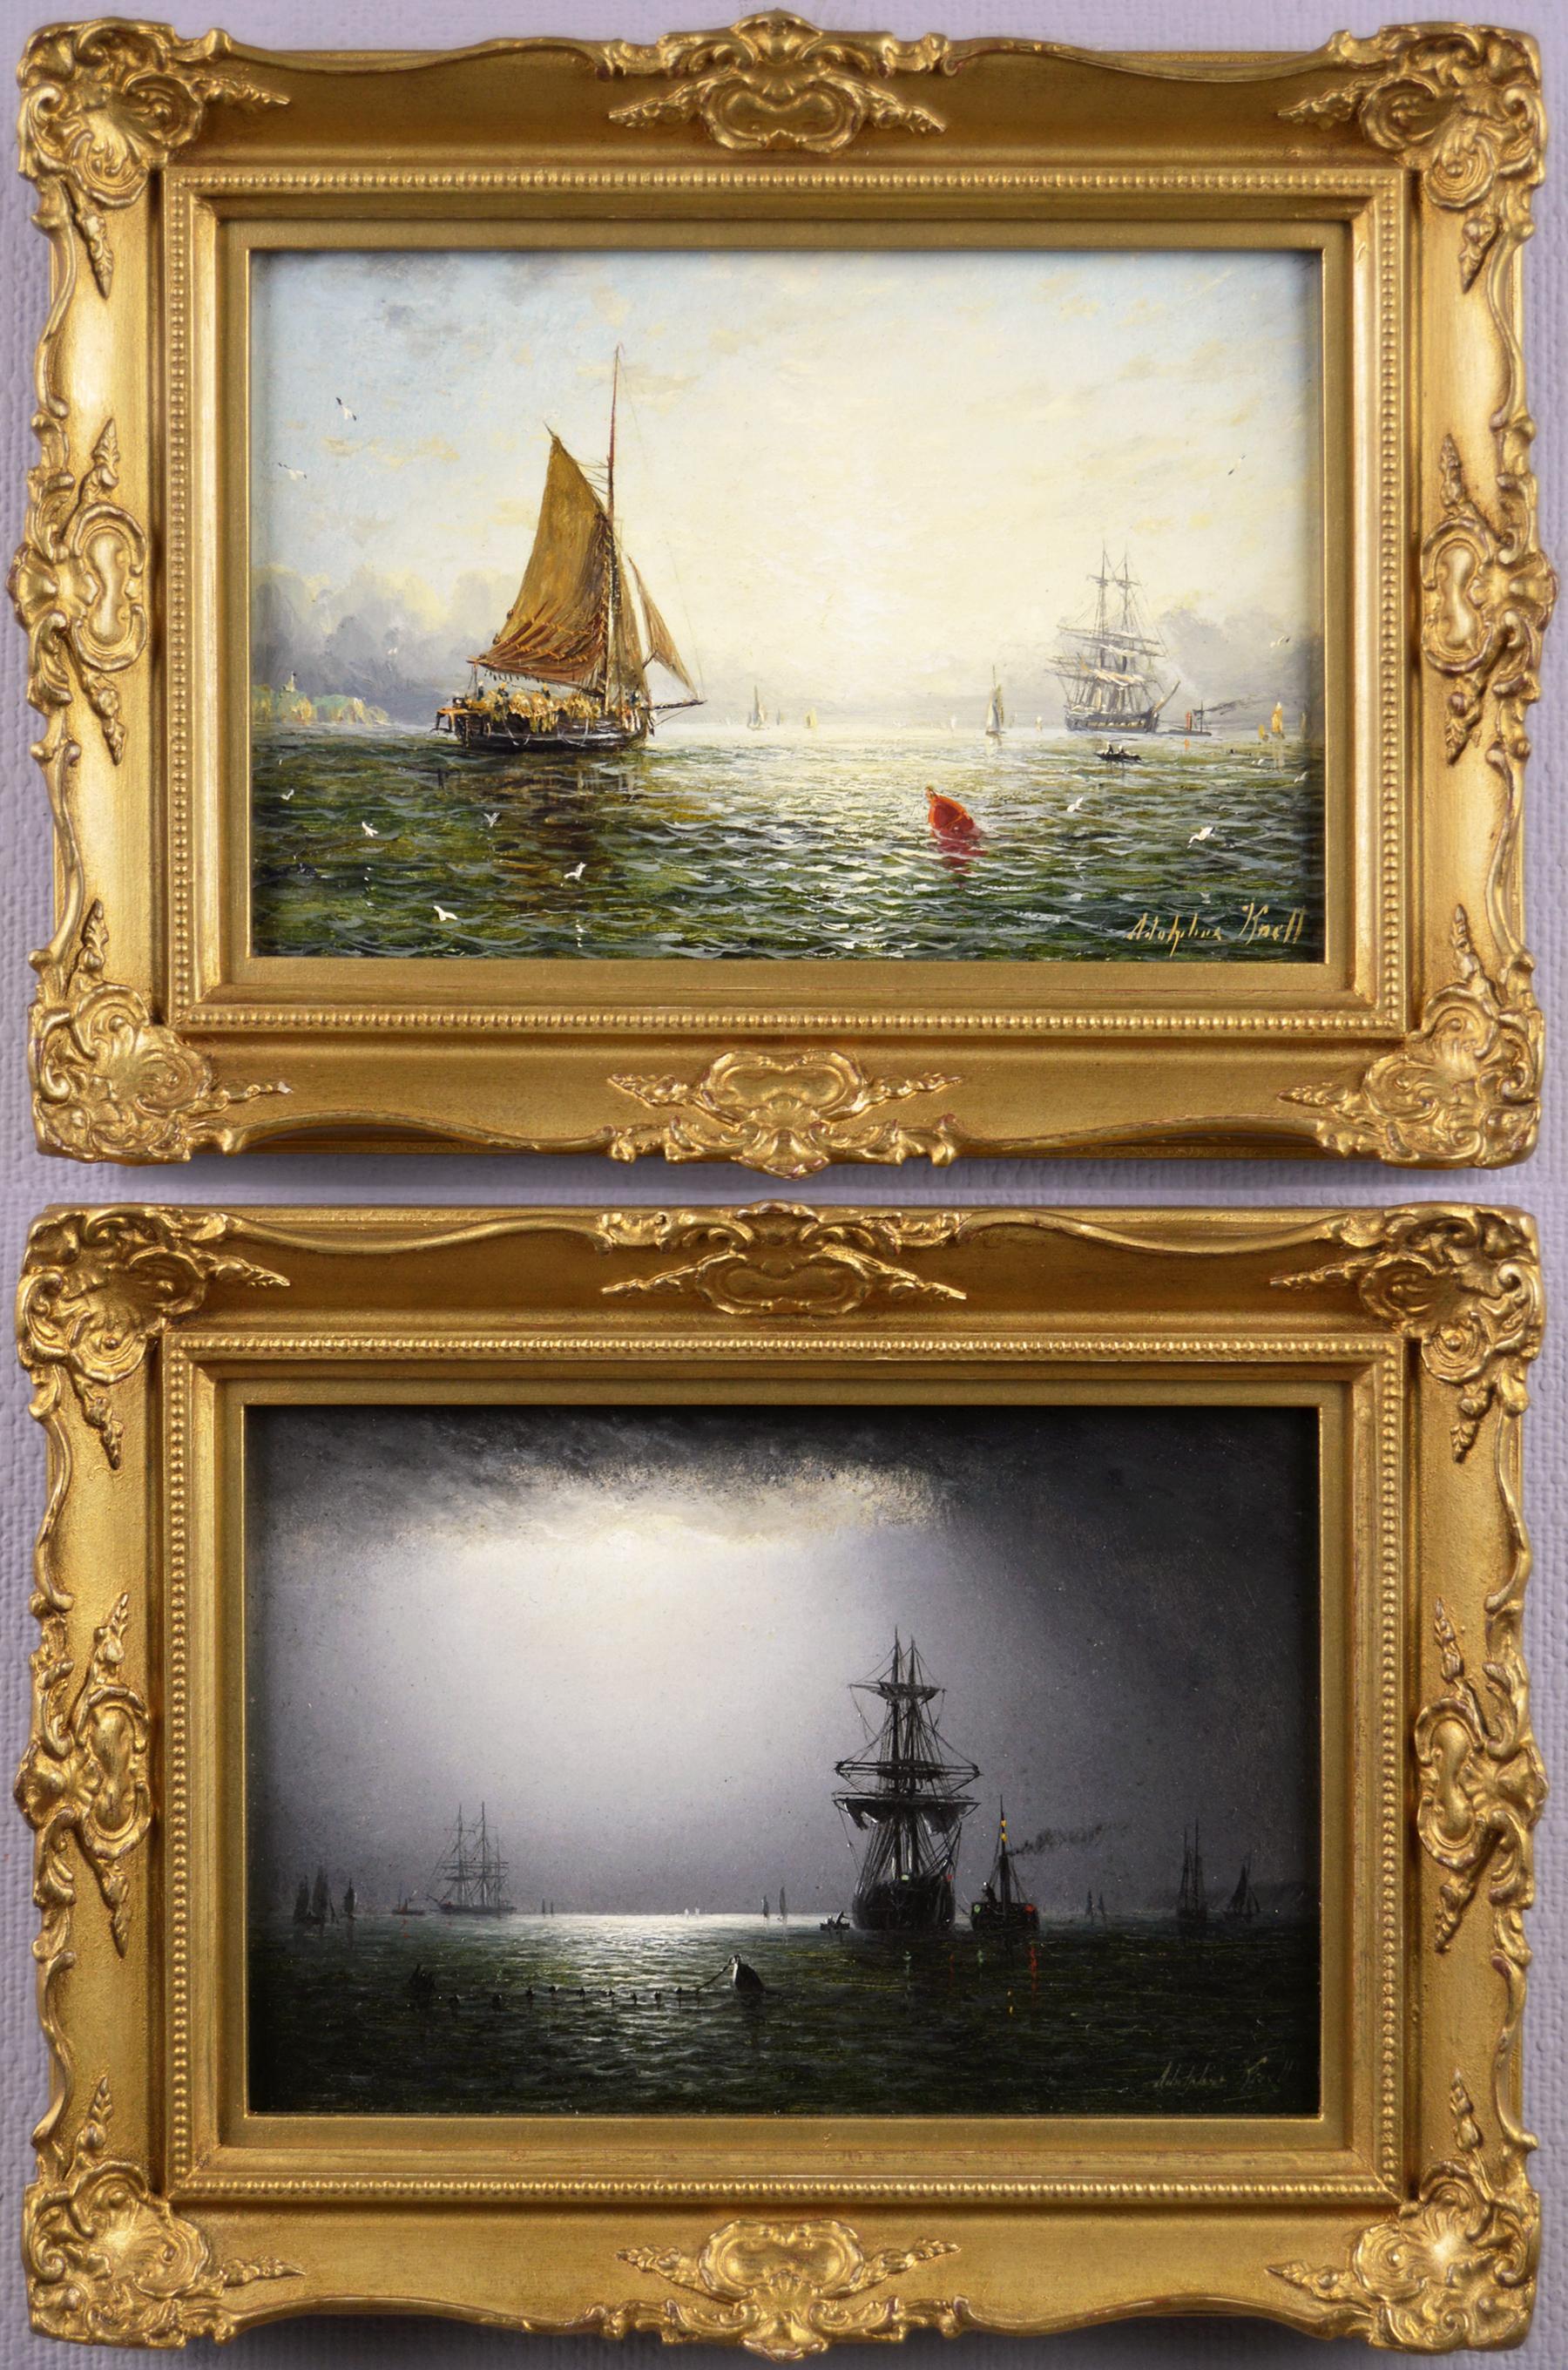 Adolphus Knell Landscape Painting - 19th Century pair of seascape oil paintings of fishing boats 